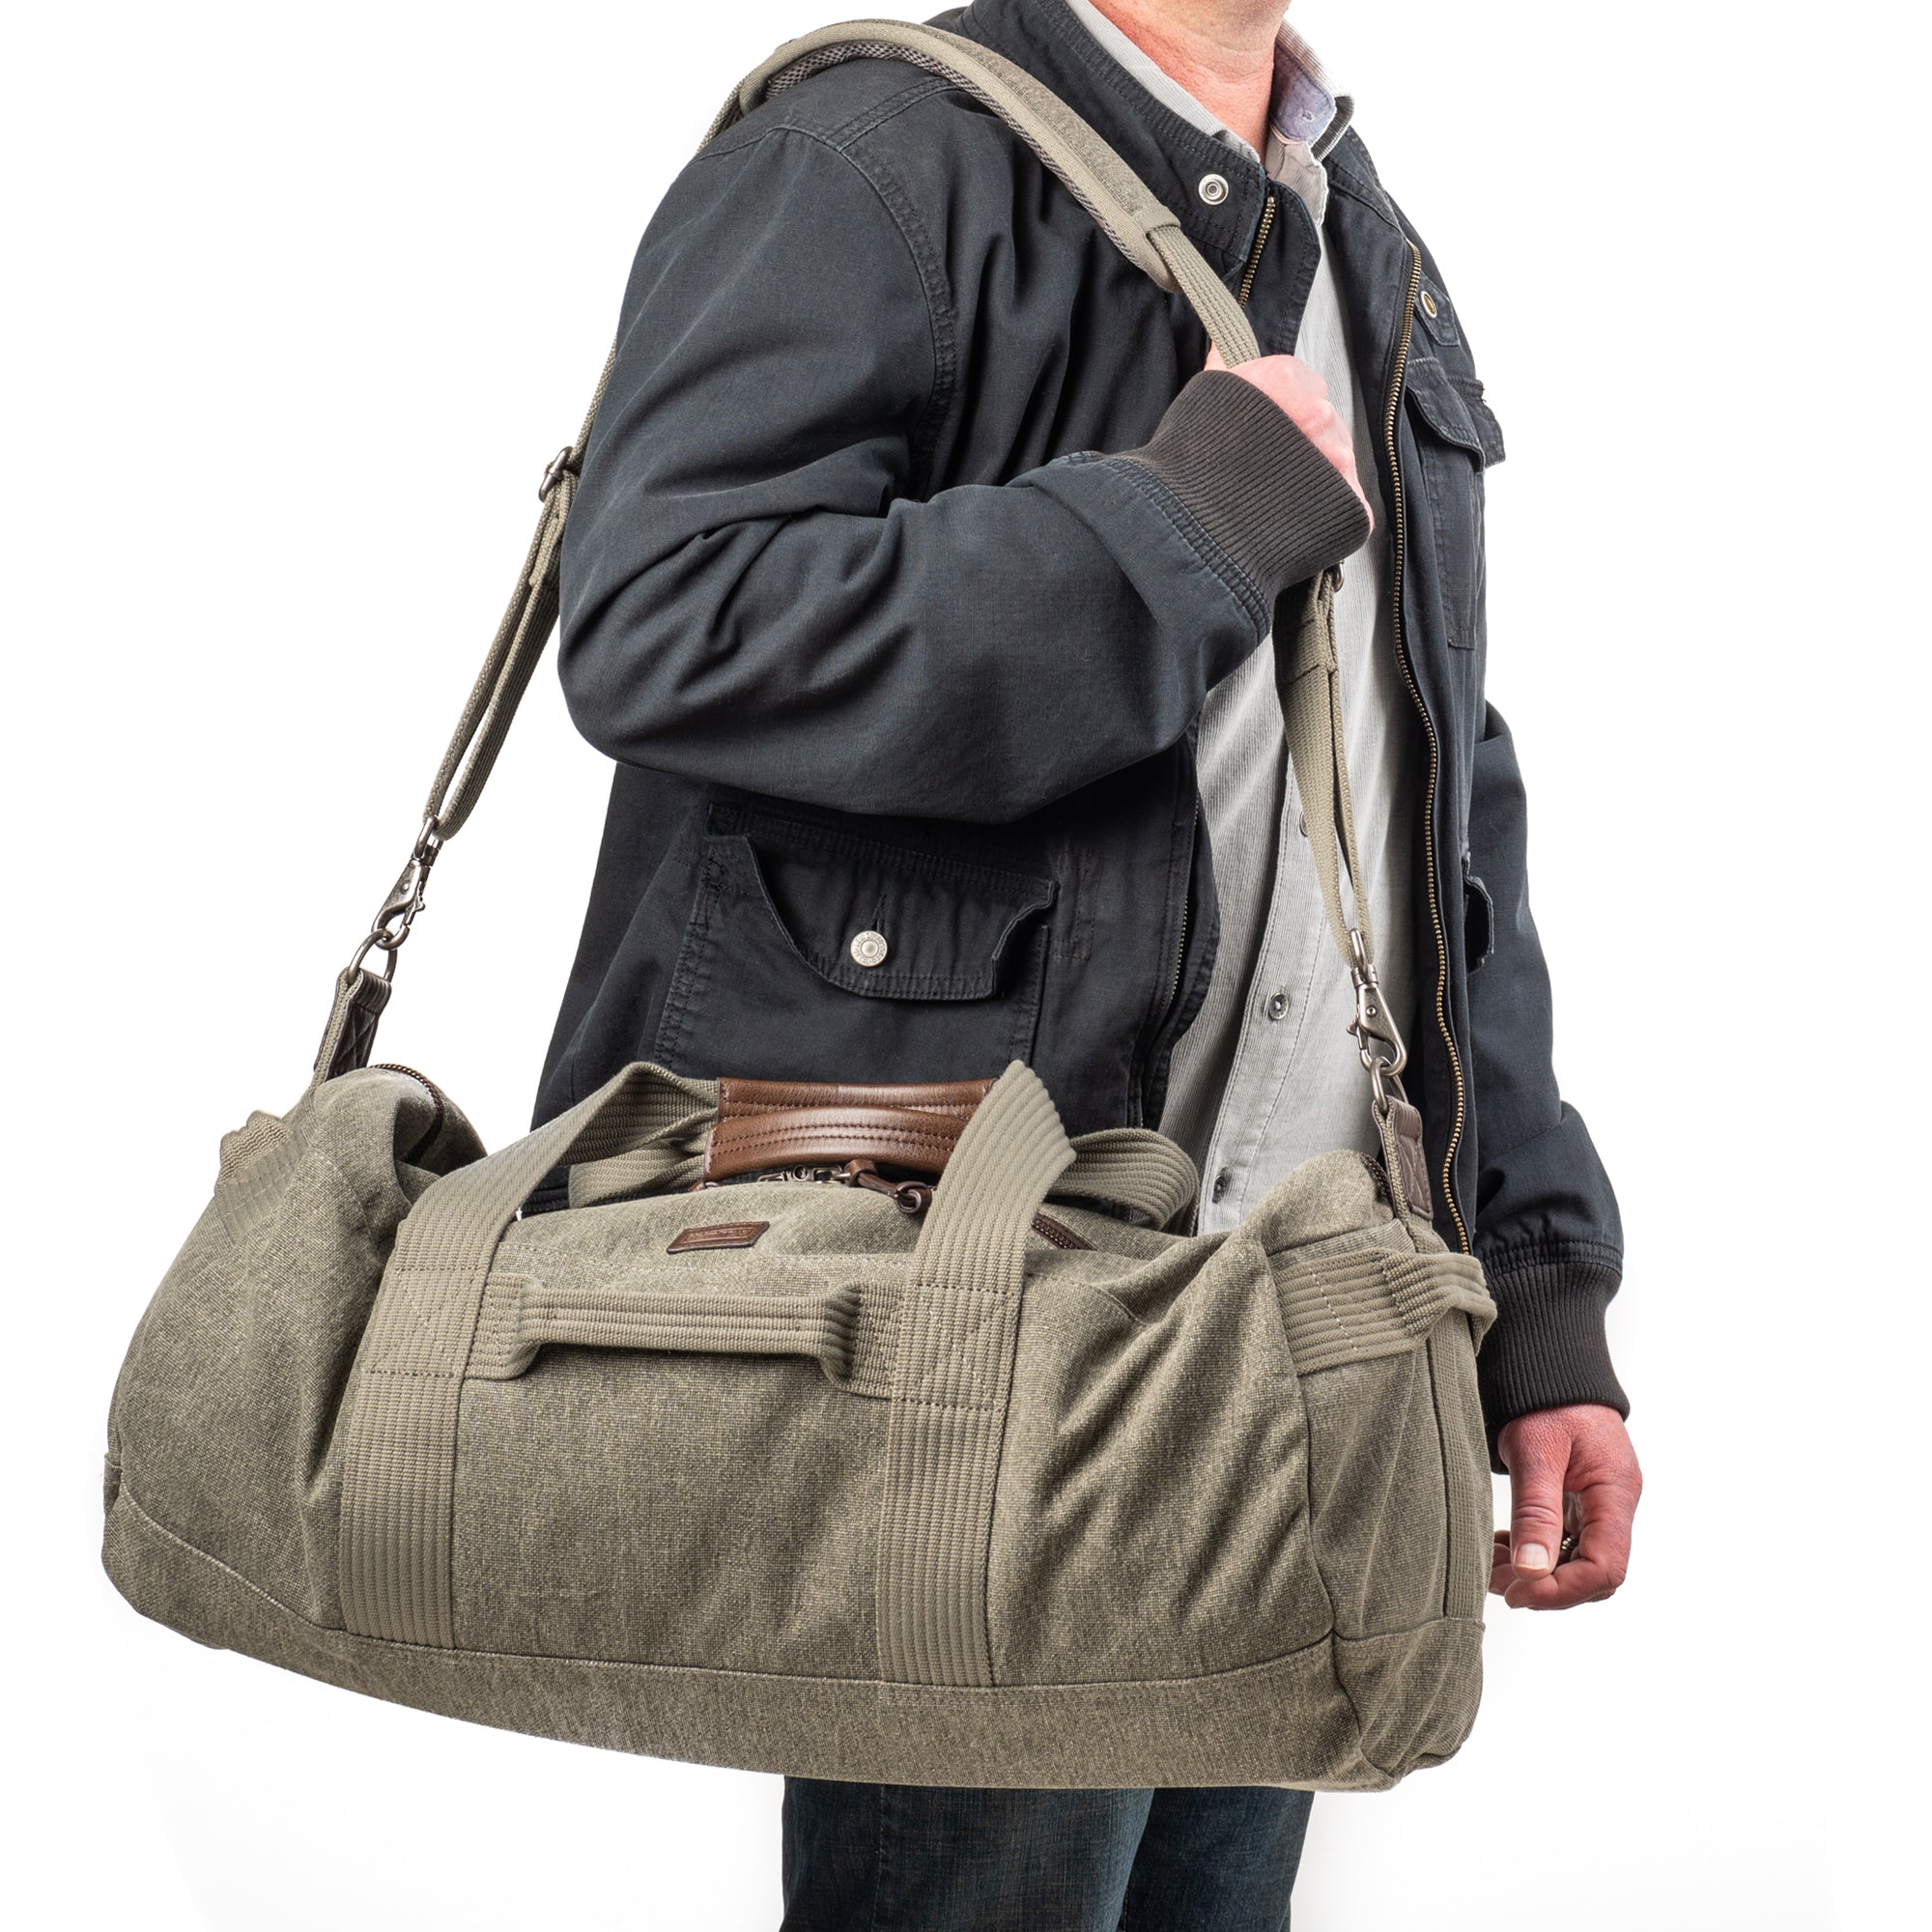 Retrospective® 50 Duffel Bag for travel, sports, and adventure – Think Tank  Photo